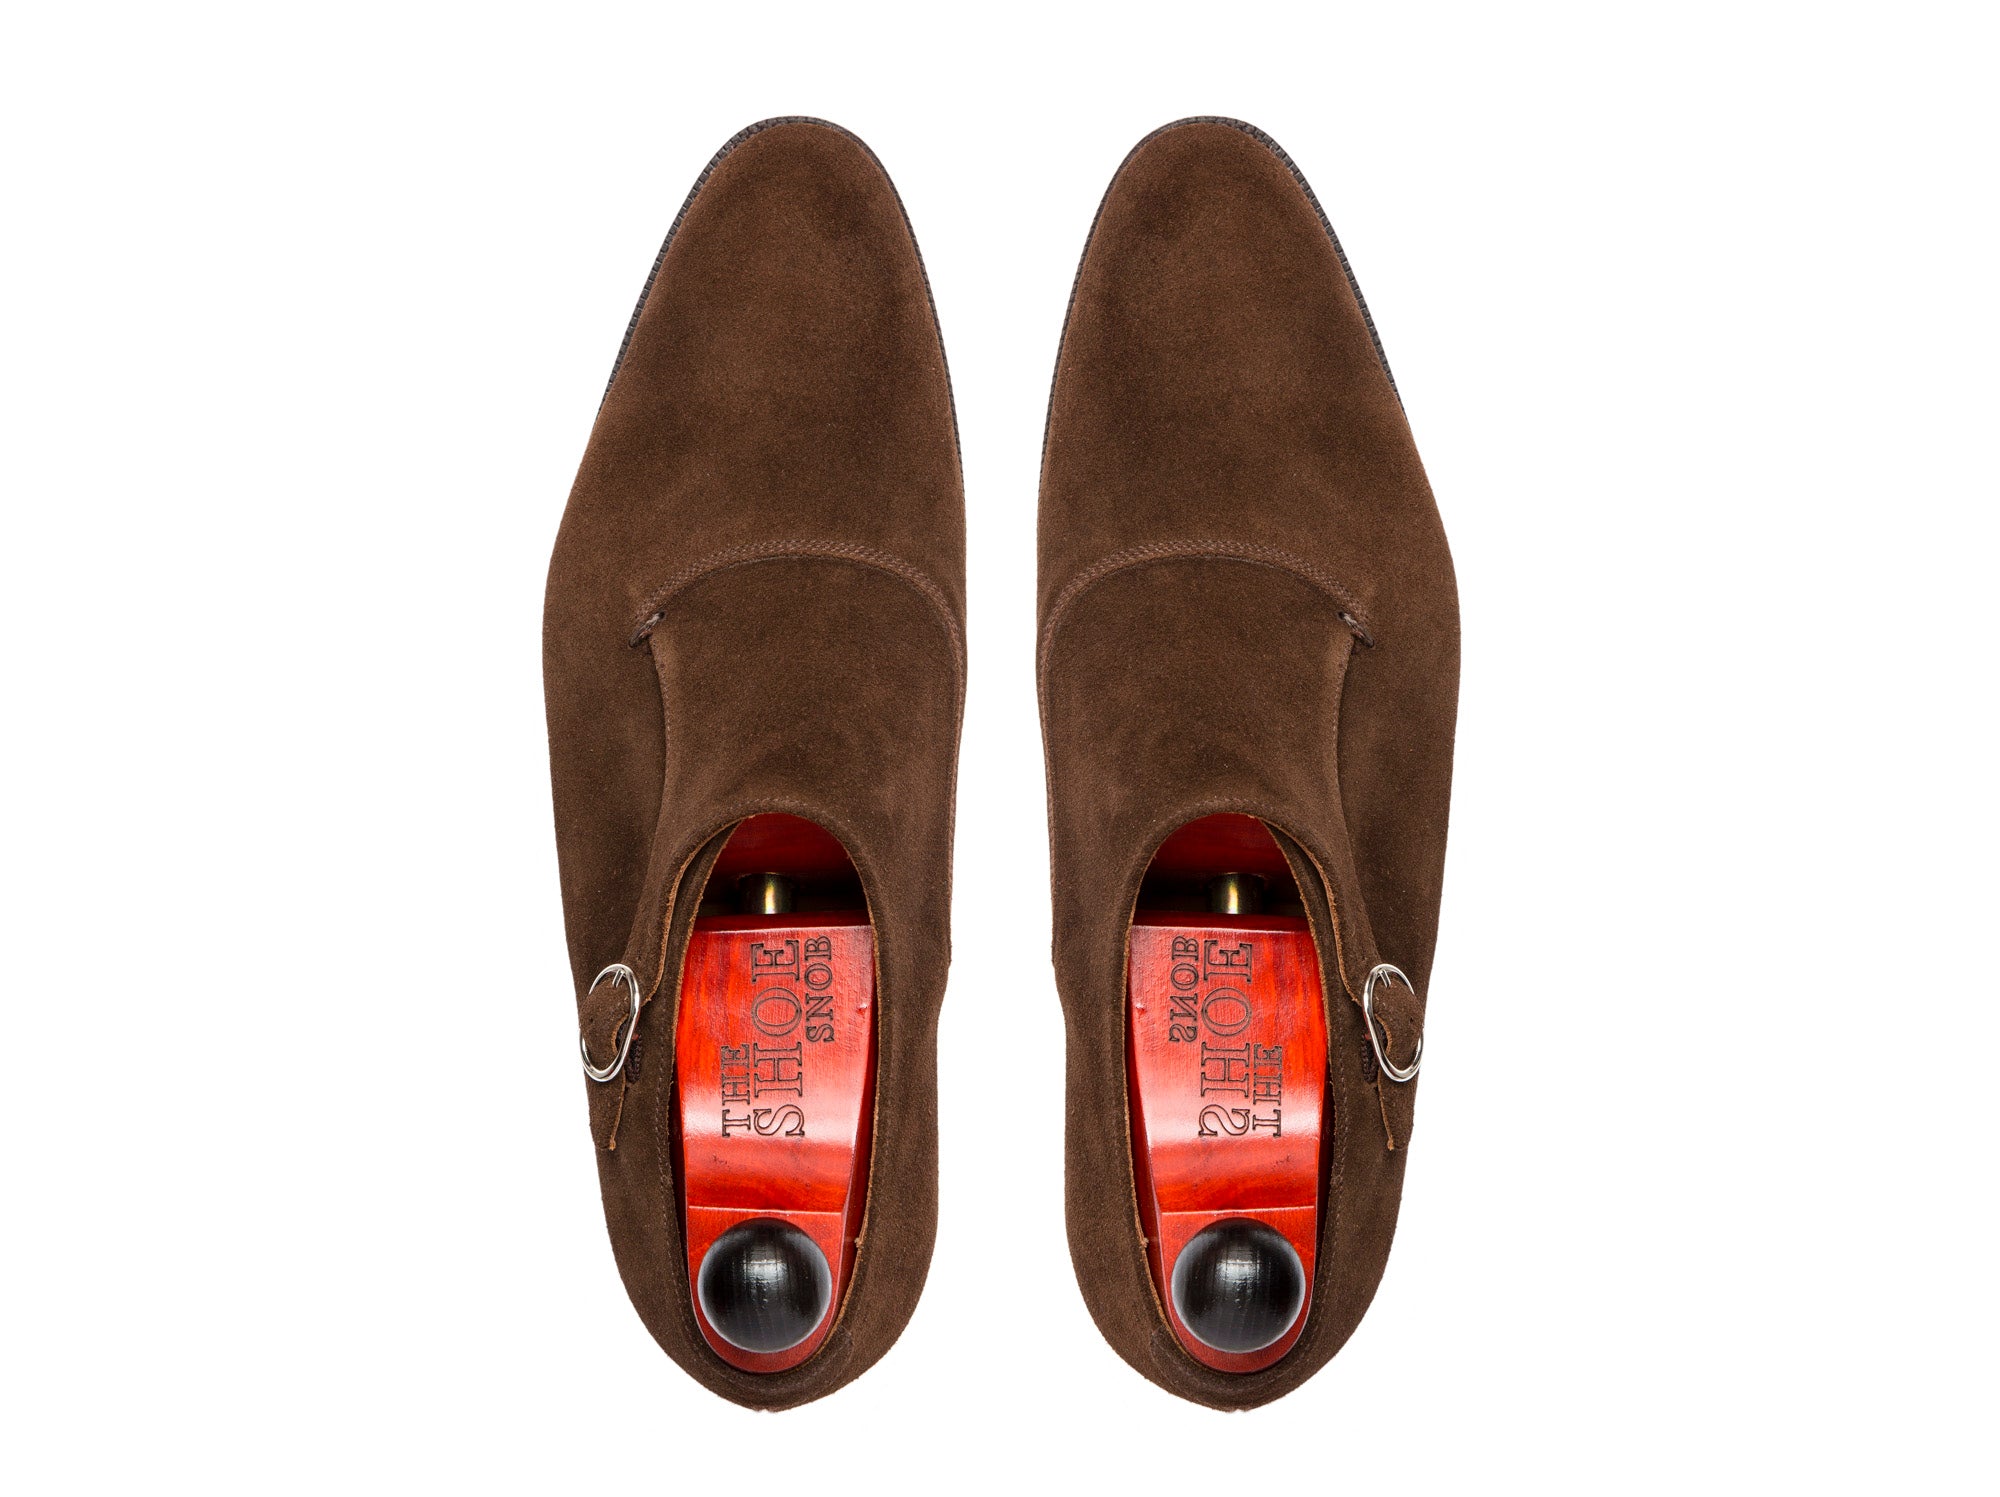 Madrona - MTO - Dark Brown Suede - NGT Last - Single Leather Sole